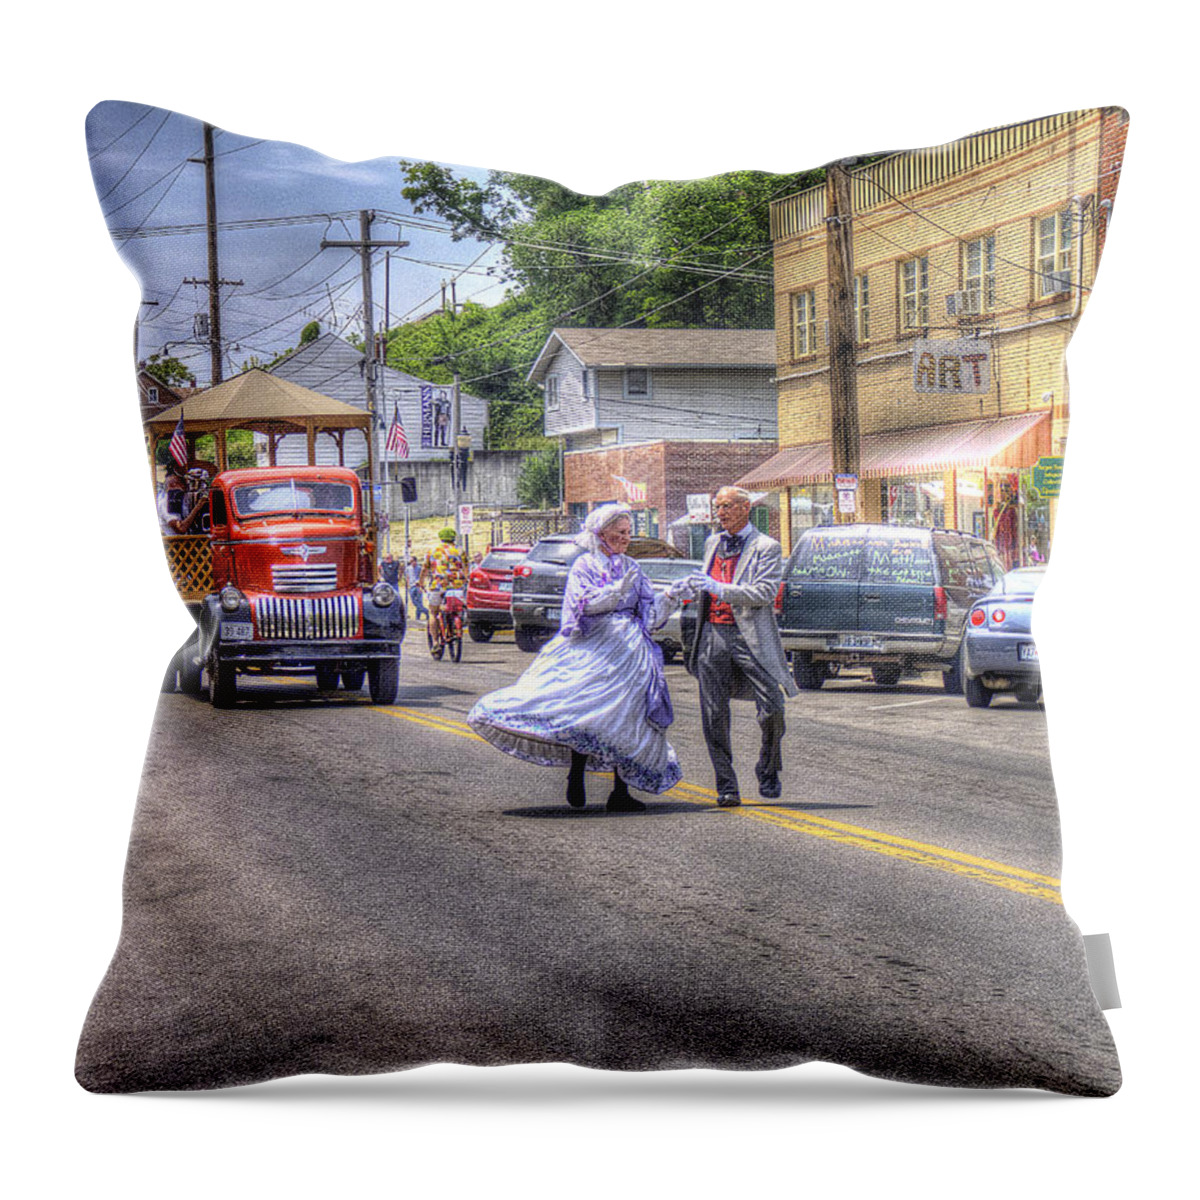 You Make Me Feel So Young Throw Pillow featuring the photograph You Make Me Feel So Young by William Fields